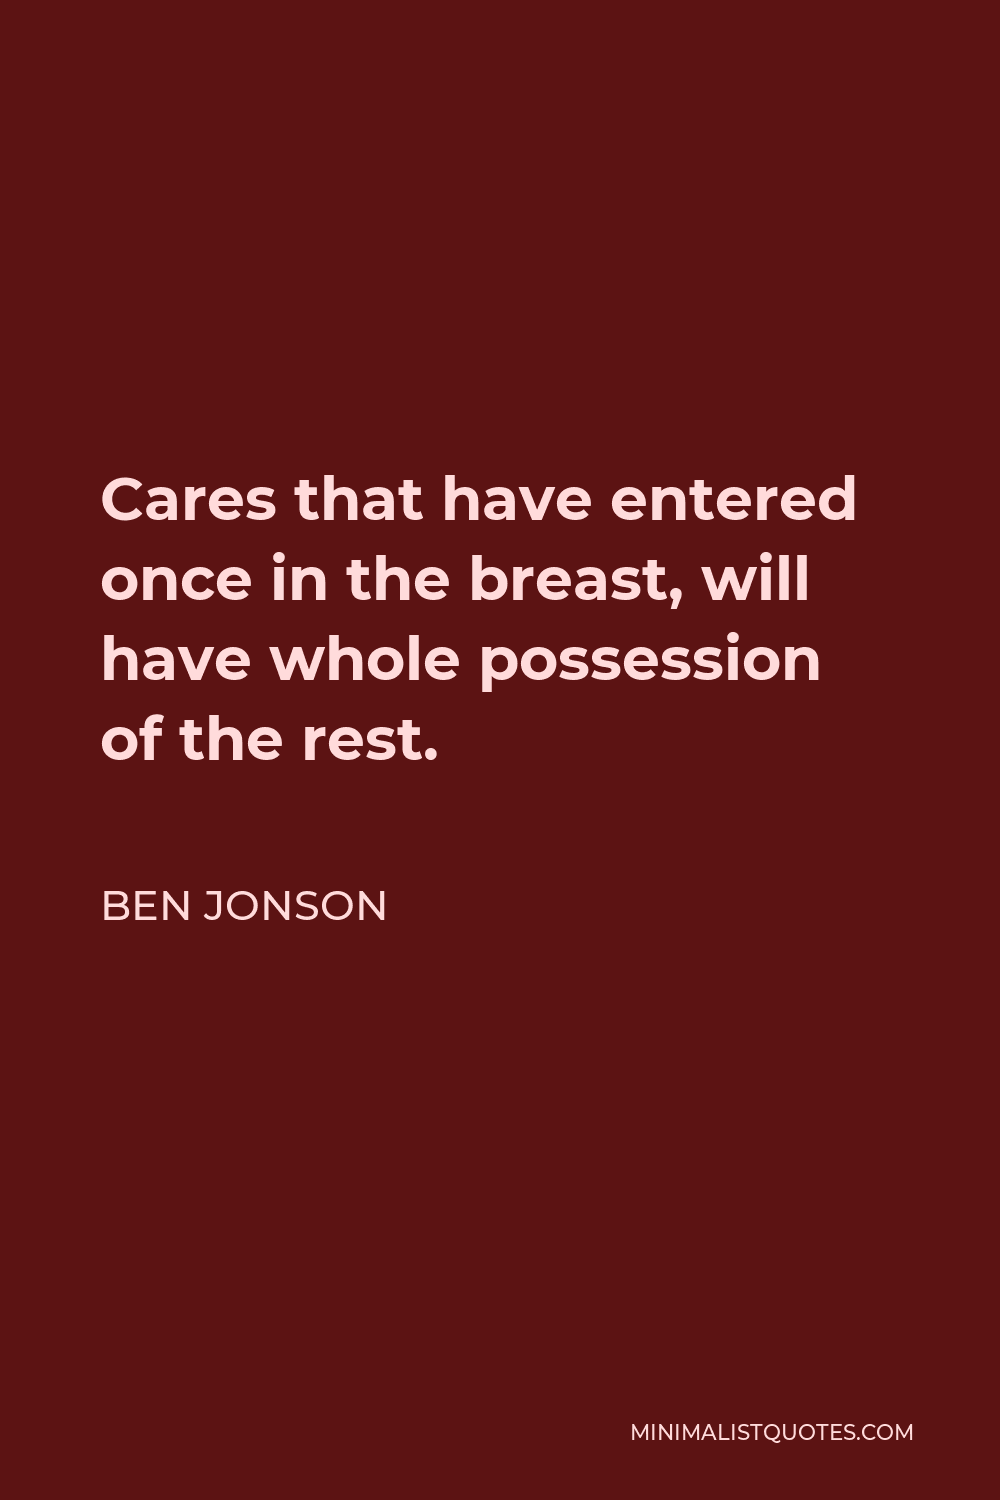 Ben Jonson Quote - Cares that have entered once in the breast, will have whole possession of the rest.